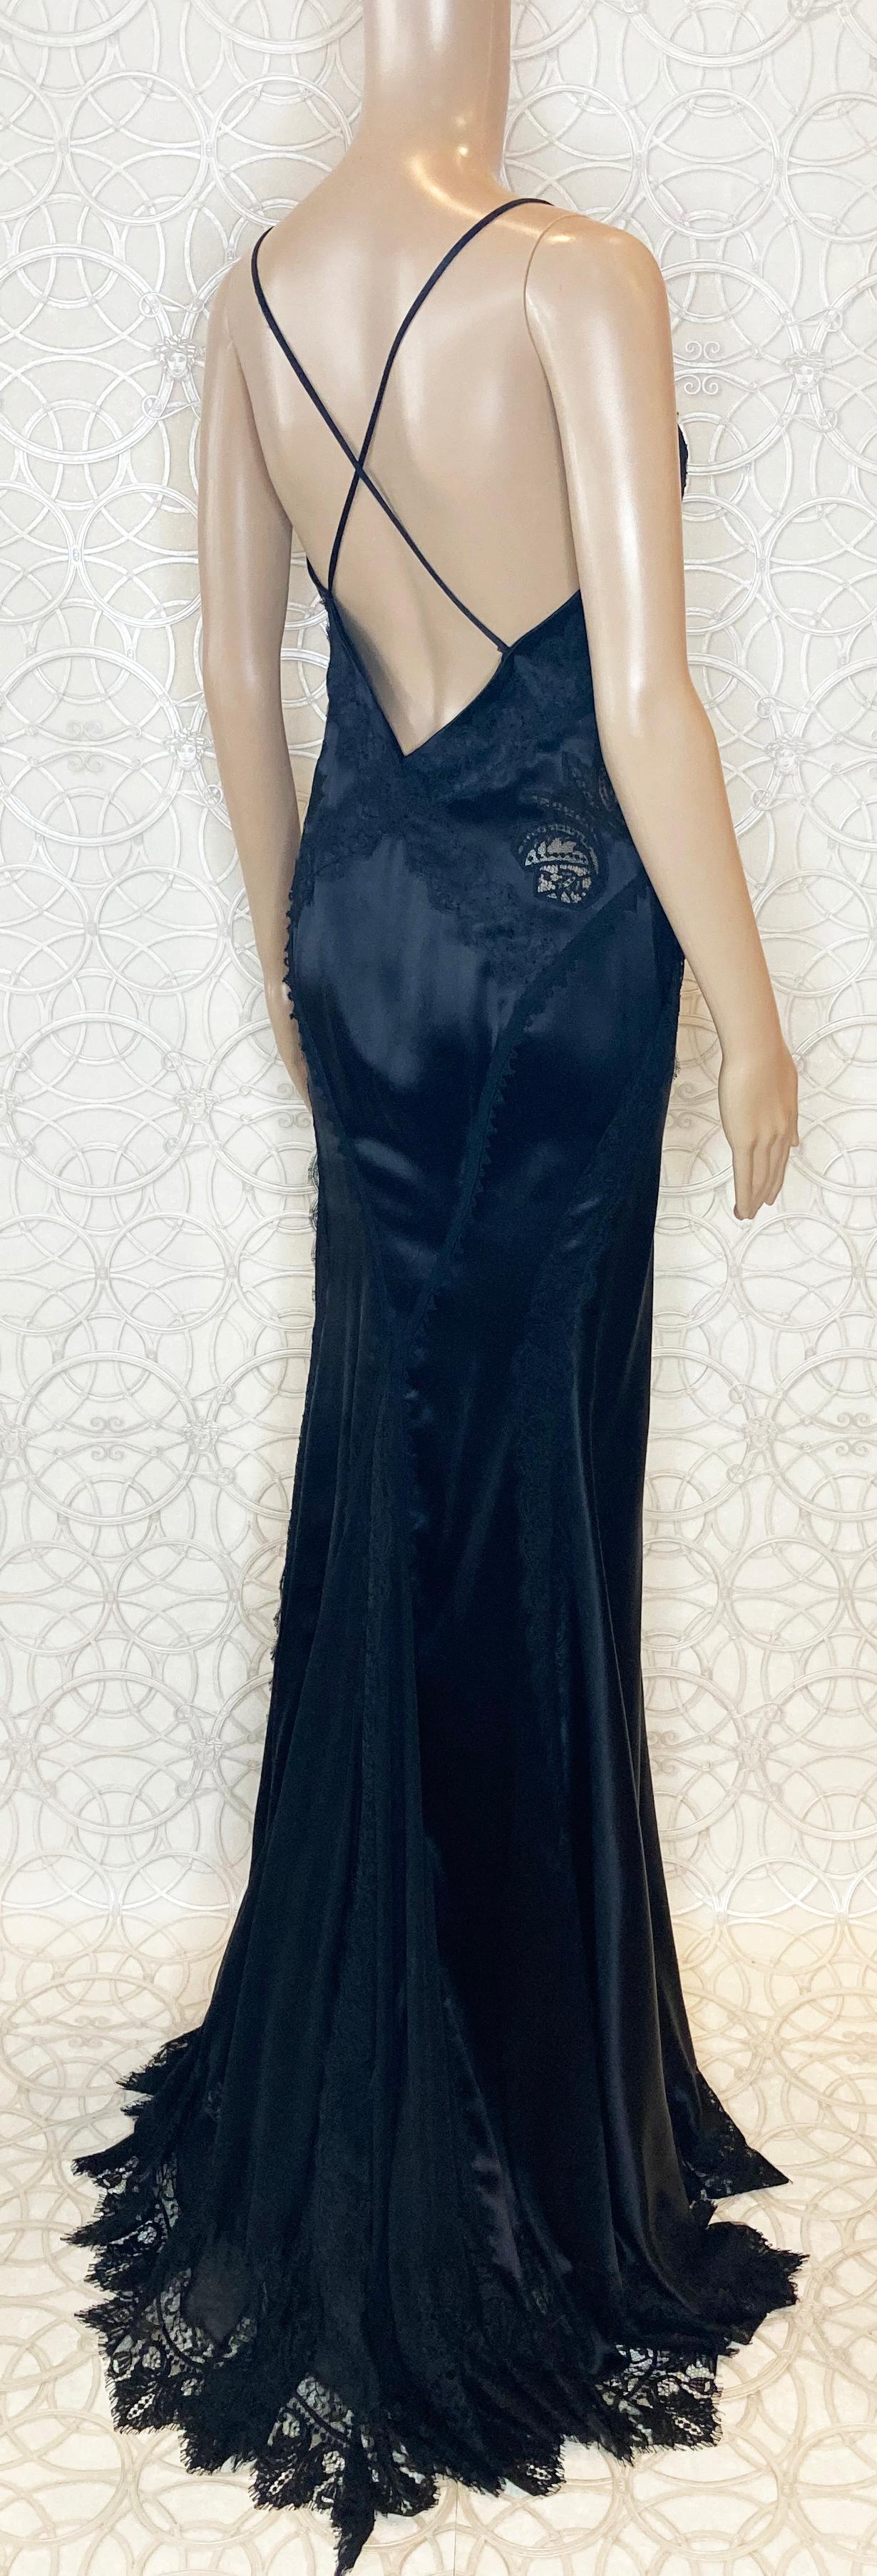 VINTAGE VERSACE BLACK SILK and LACE LONG GOWN DRESS 40 - 4 For Sale 4